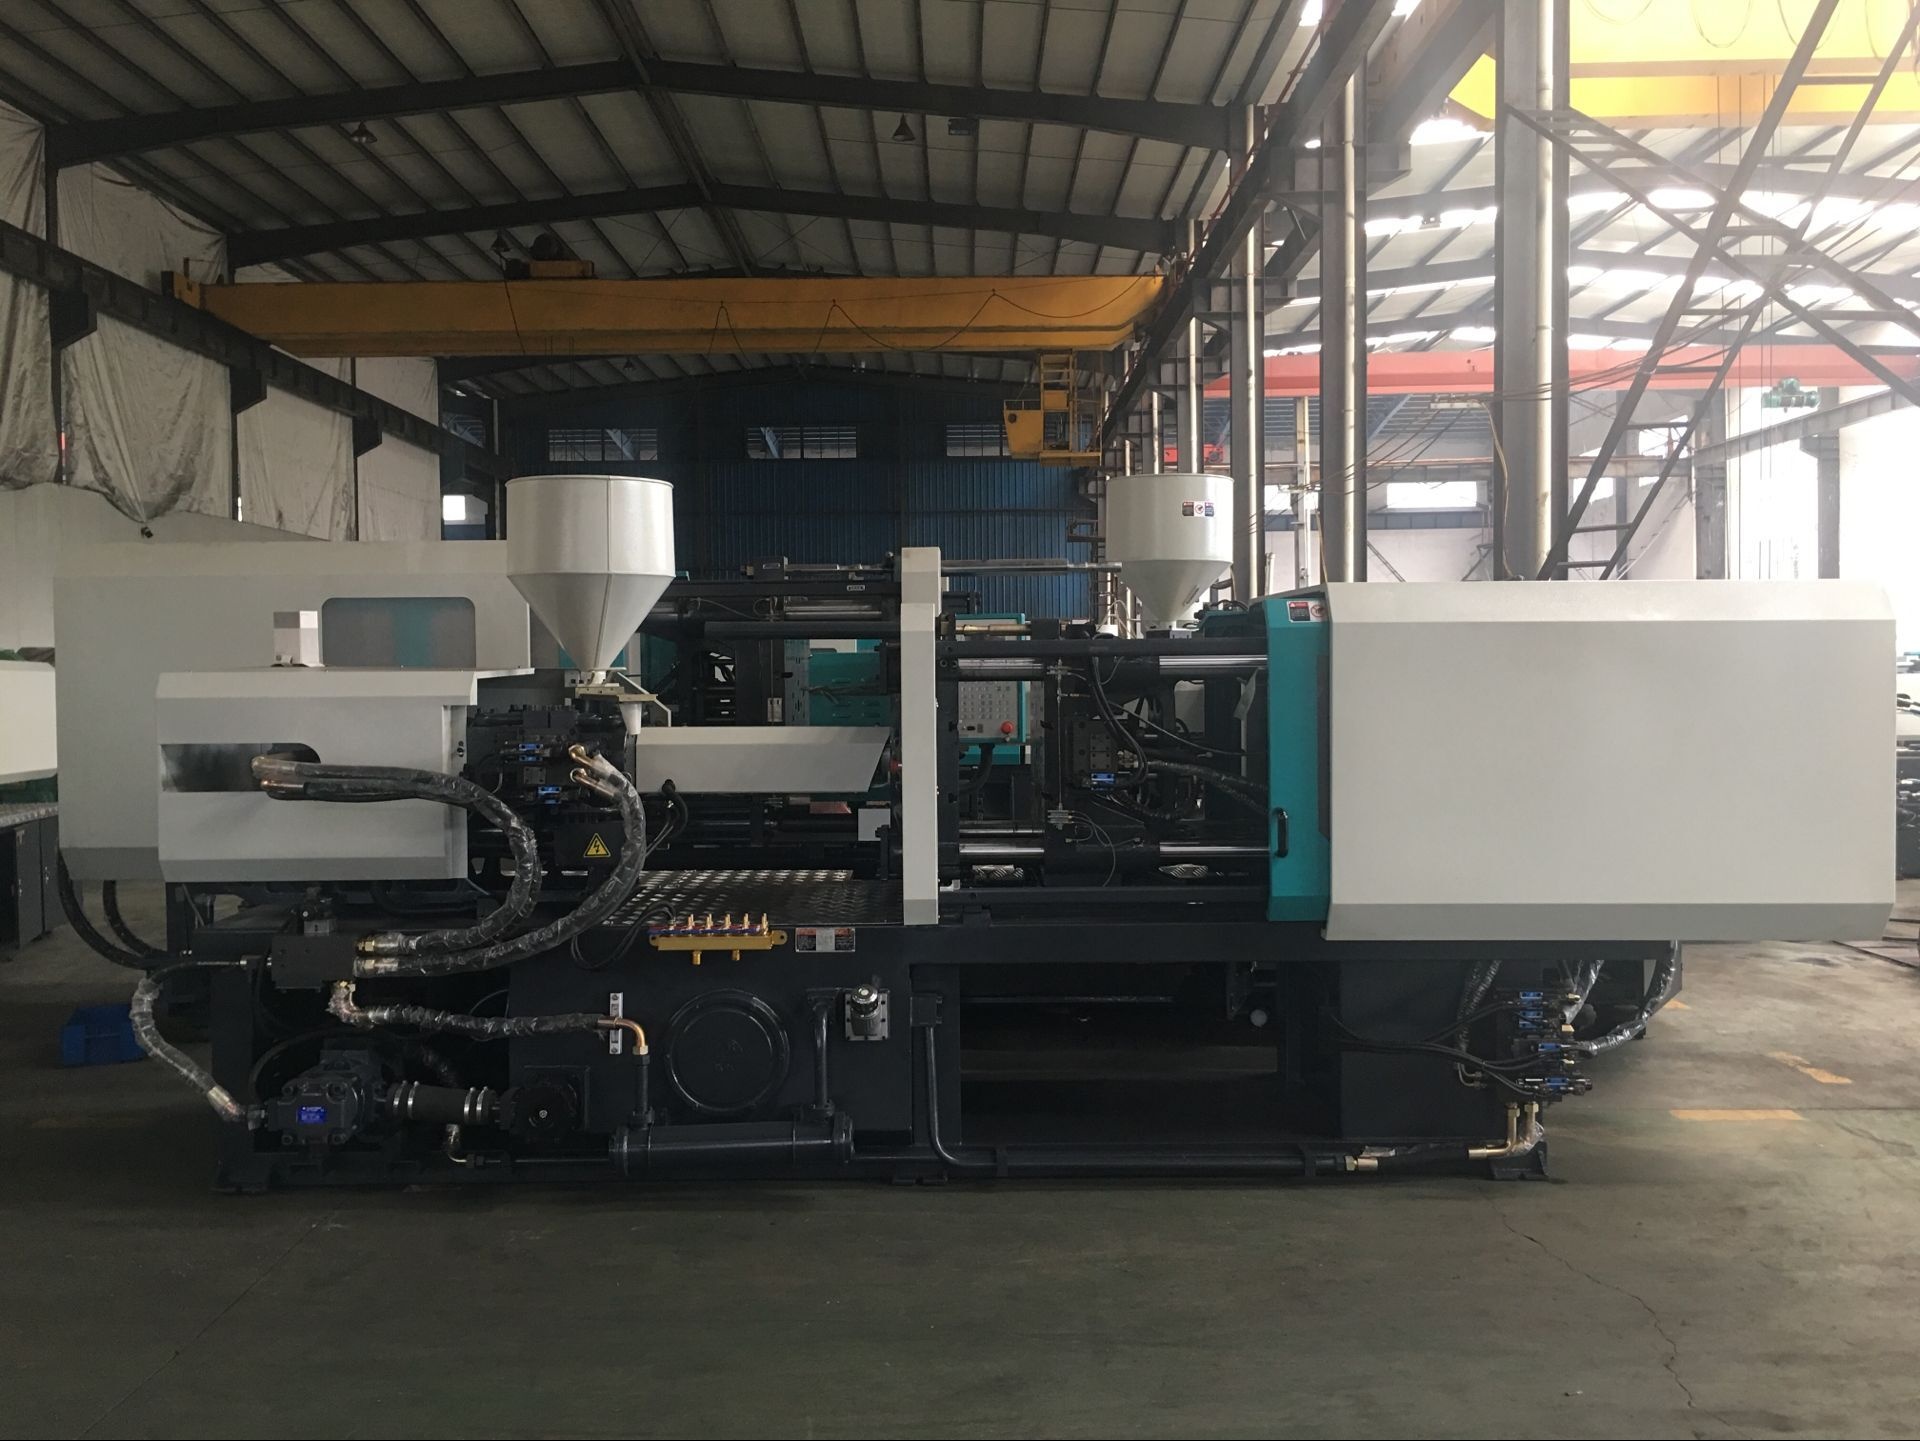 Solon Hout Zaagsel Pallet Blok Molding Machine - Buy Wood Saw Dust Hot Pressed Briquetting Machine,<a href='/wood-sawdust-block-making-machine/'>Wood Sawdust Block Making Machine</a>,Hollow Block Machine For Sale Product on Alibaba.com